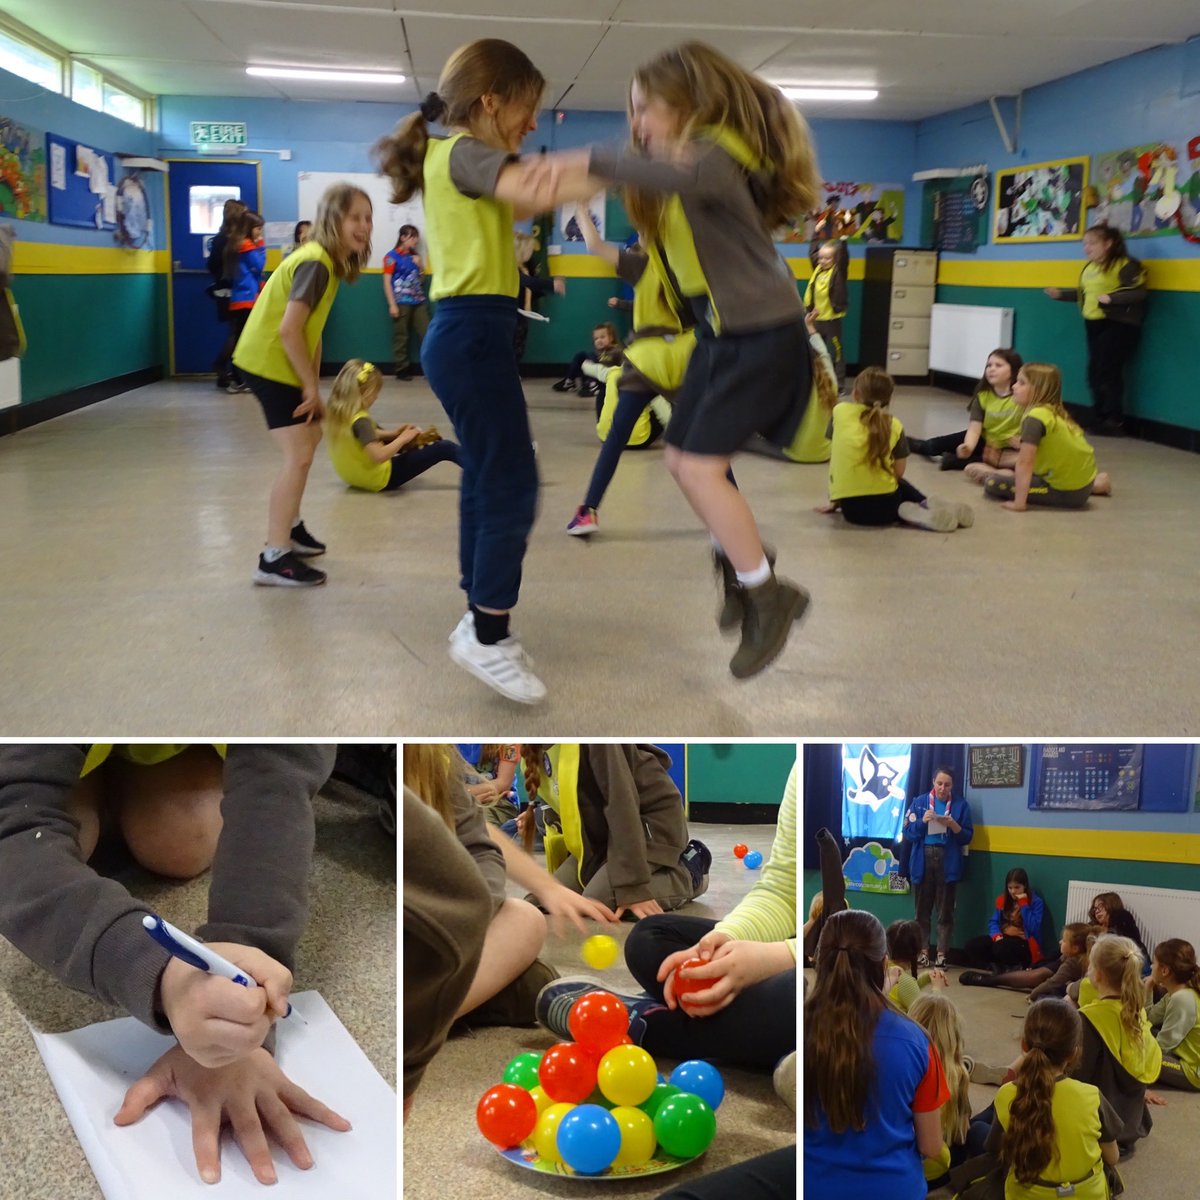 Think Resilient. During our recent peer education session, we learned techniques to boost resilience and deal with challenging situations we may face in life. #hernebay #girlguiding #brownies